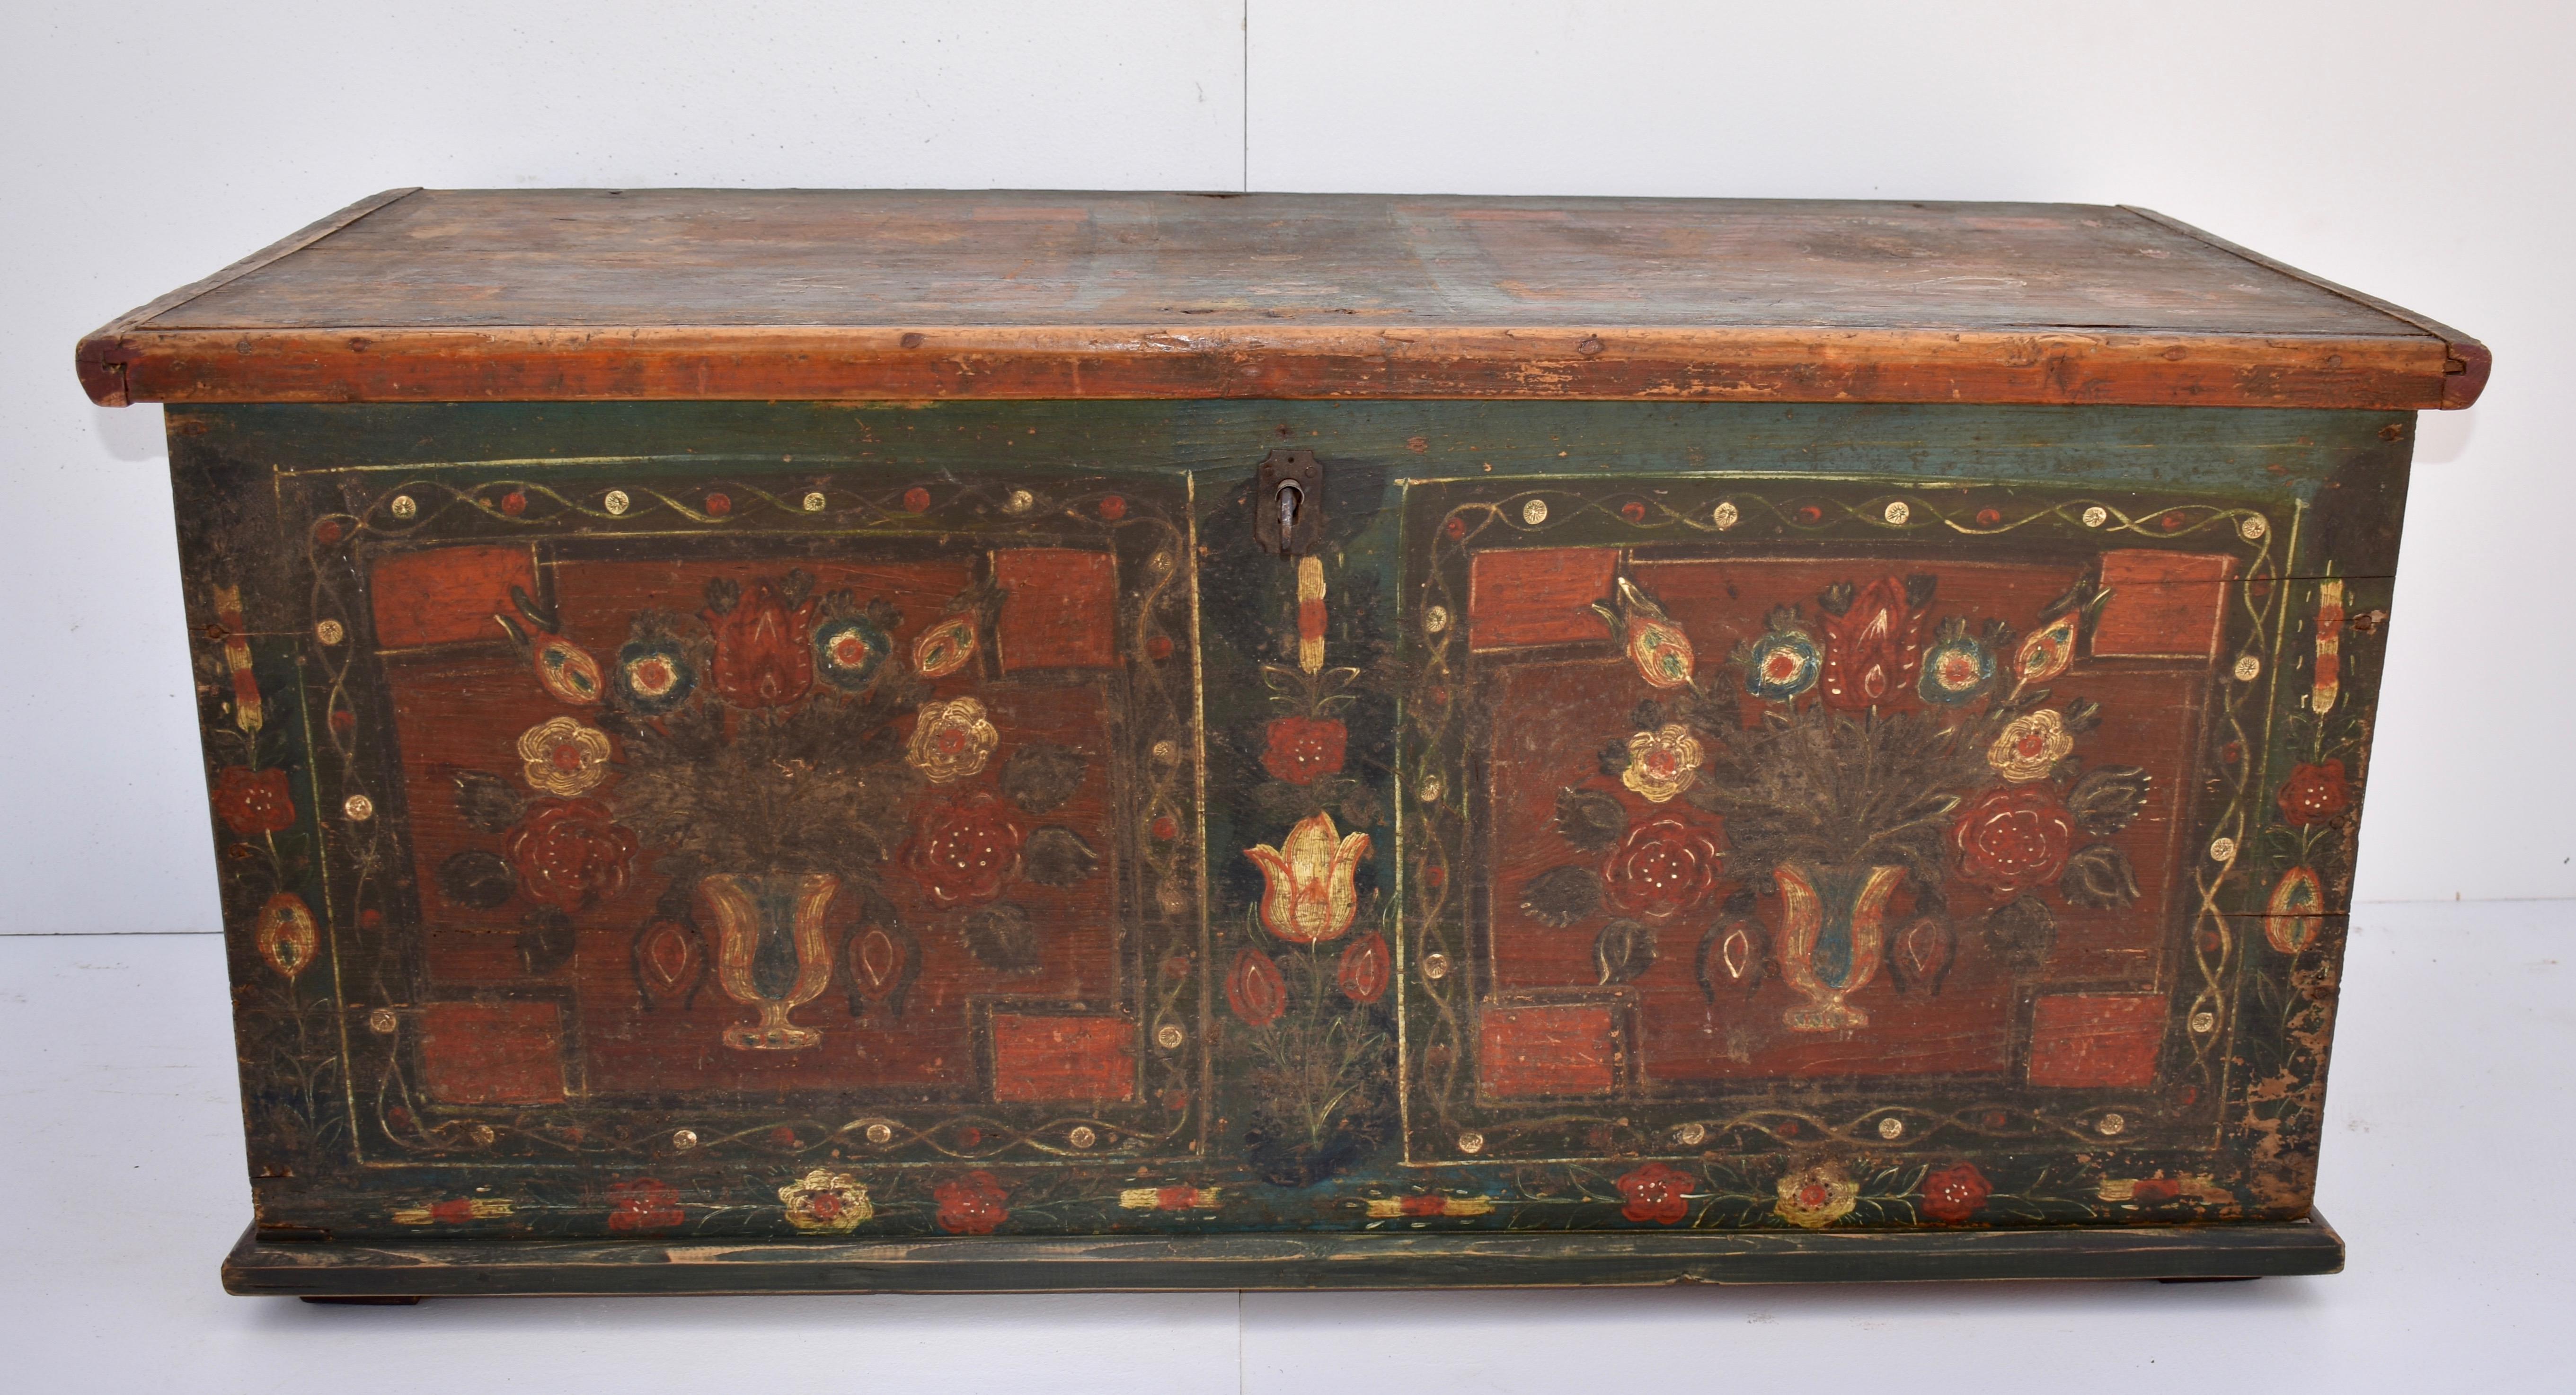 This beautifully painted primitive trunk is nailed rather than dovetailed. The front bears two stylized urns of flowers within painted panels with multicolored floral work between and around them. The sides show a bouquet of flowers, tied with a